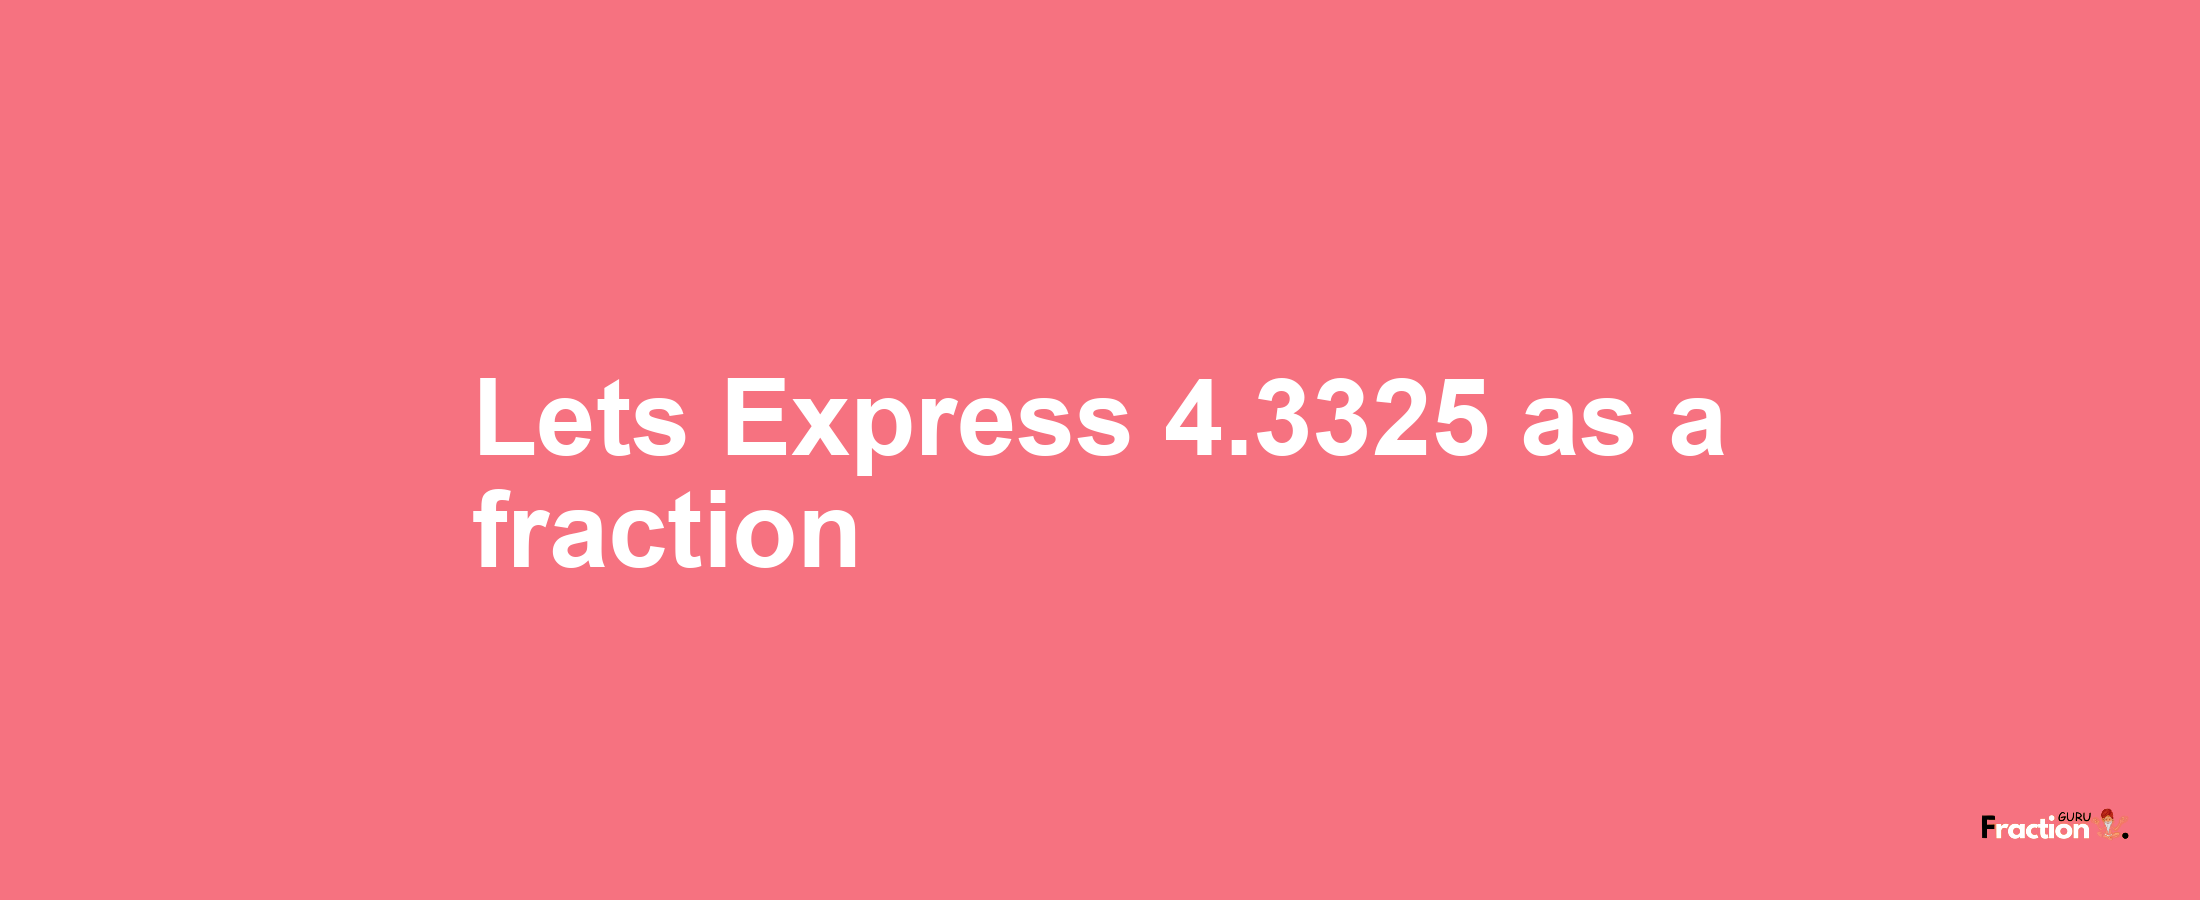 Lets Express 4.3325 as afraction